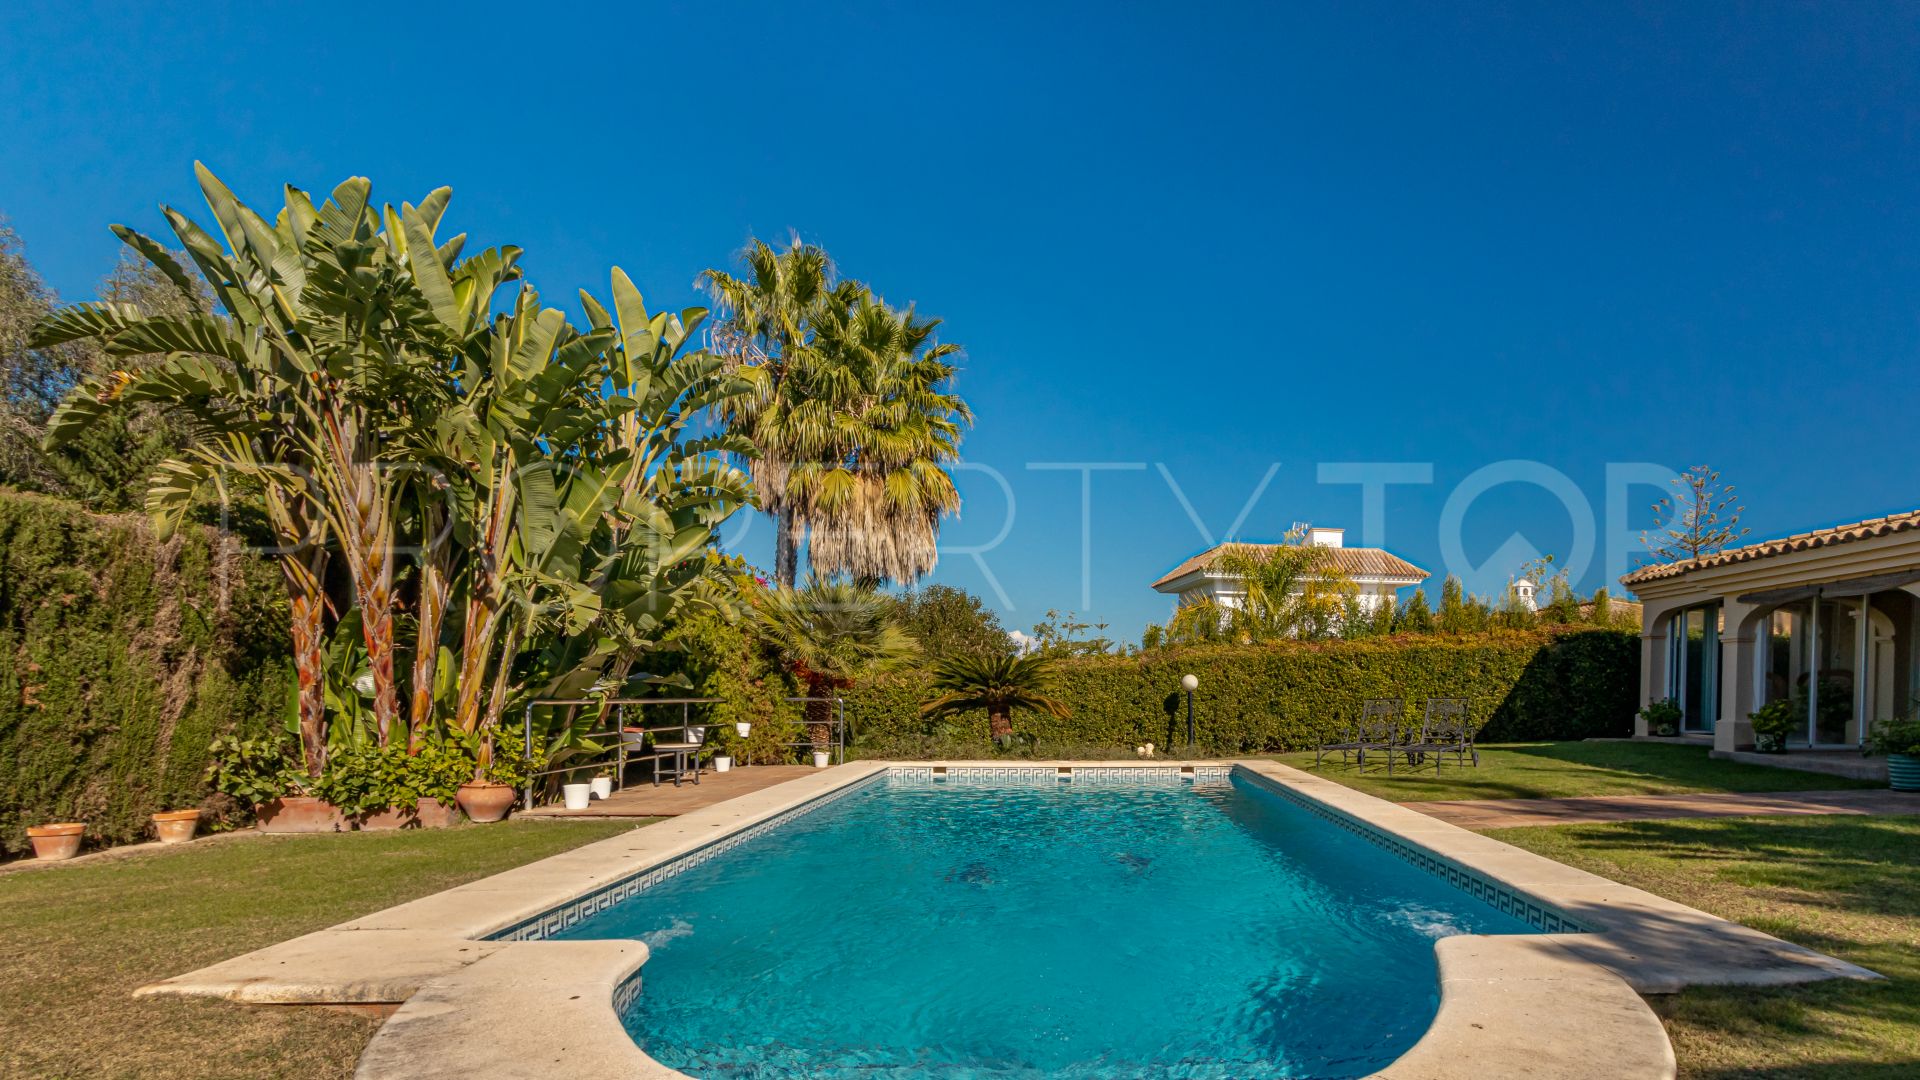 For sale Zona B villa with 4 bedrooms